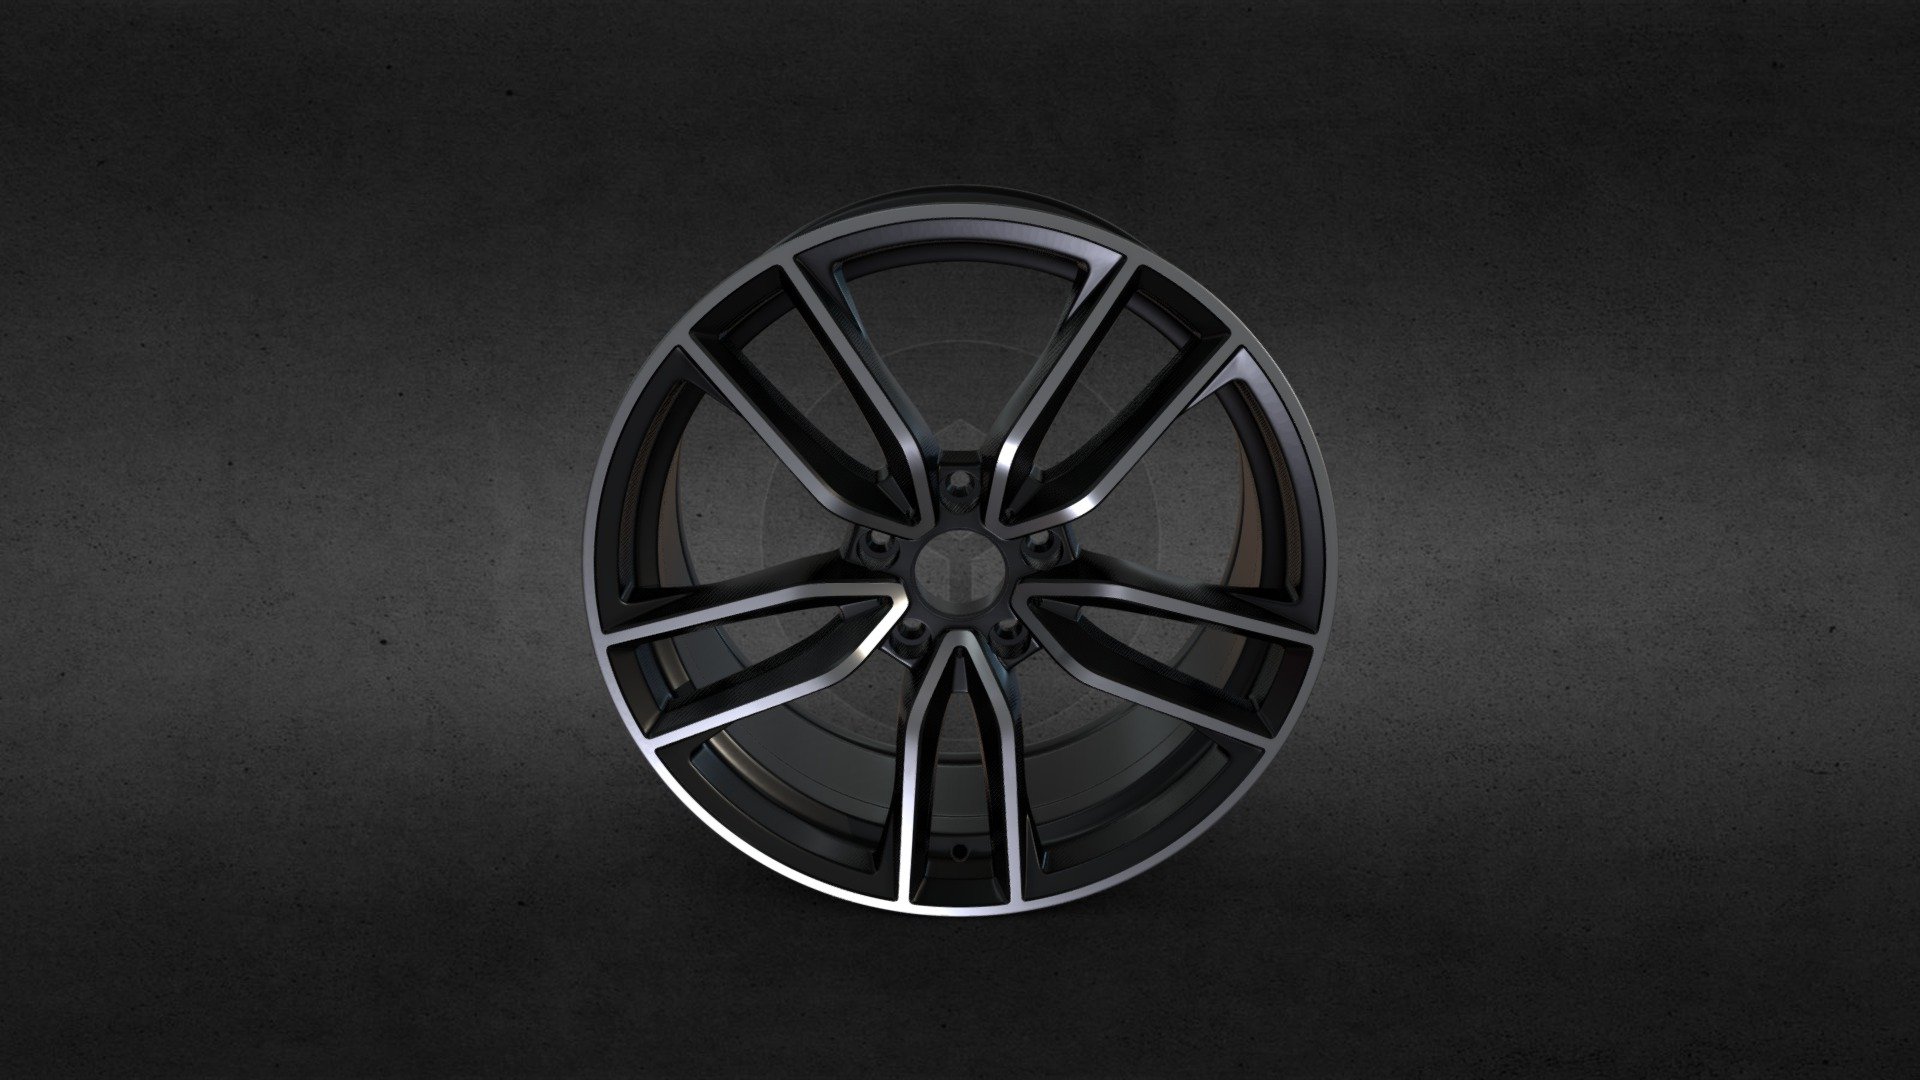 Rim / wheel disc 
You can purchase our models of rims on Blendermarket by Brothermechanic
Also you can watch my screencast of modeling this rim on https://youtu.be/XJxGkfGPmoo - Car rim/ car disc - 3D model by viktoriialinnik 3d model